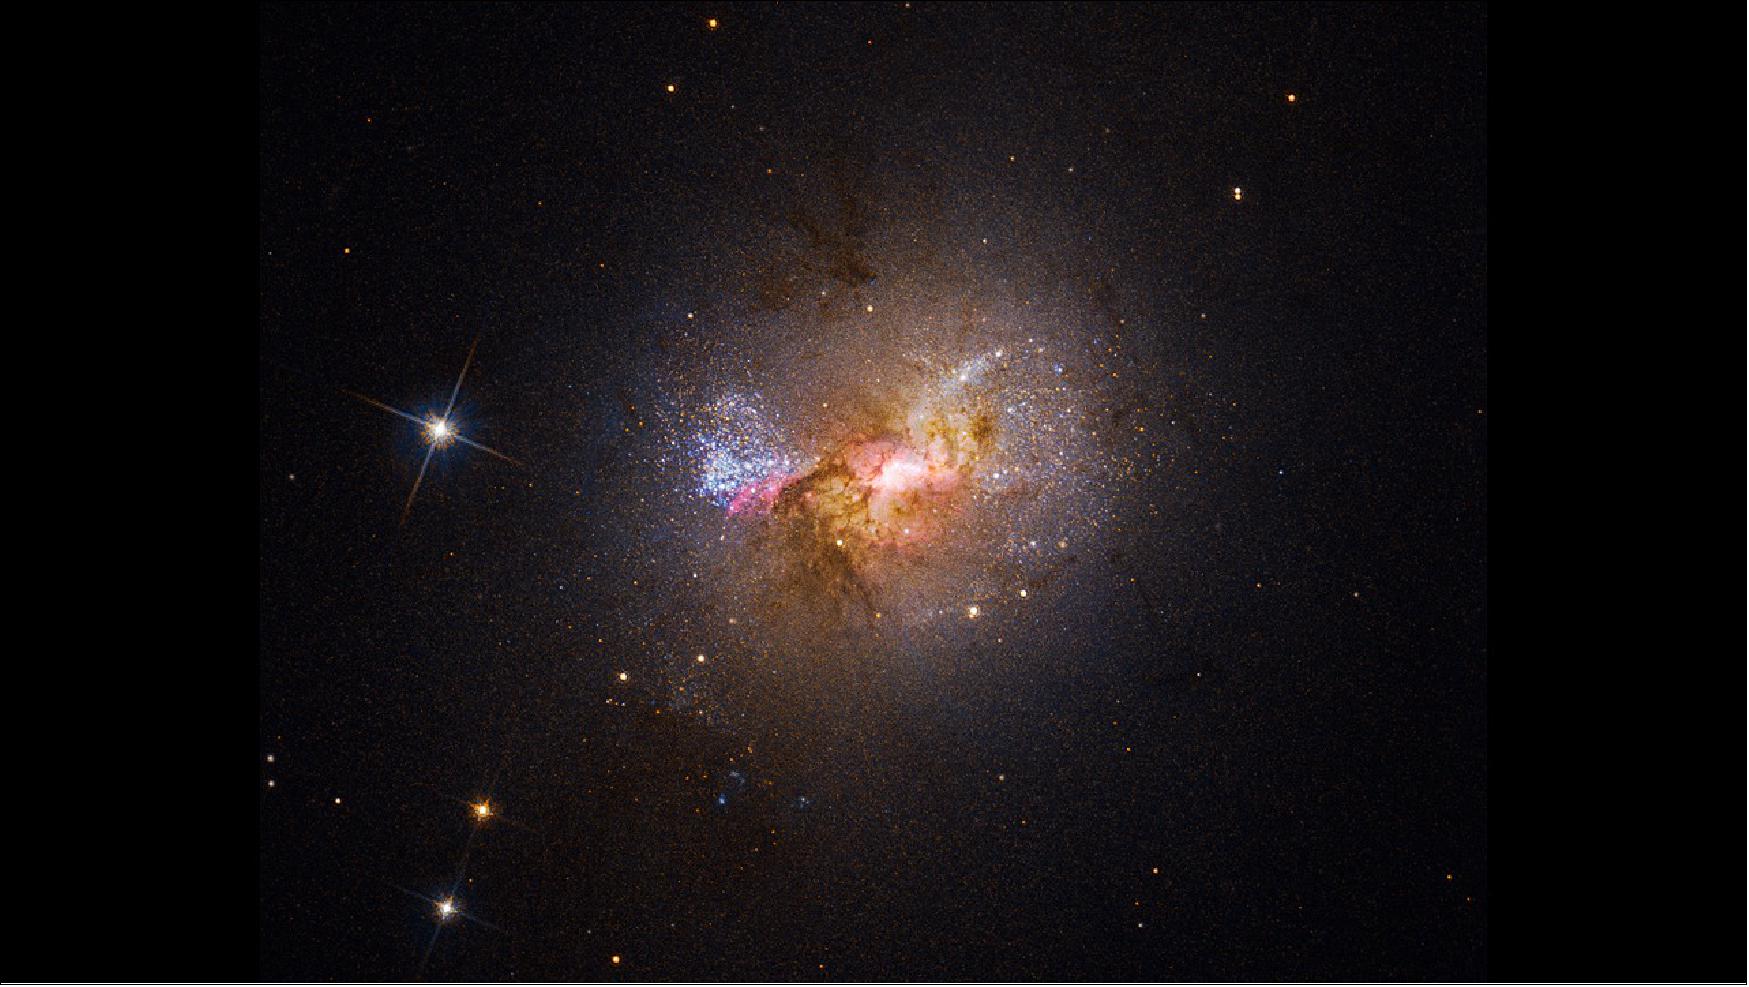 Figure 81: Dwarf starburst galaxy Henize 2-10 sparkles with young stars in this Hubble visible-light image. The bright region at the center, surrounded by pink clouds and dark dust lanes, indicates the location of the galaxy's massive black hole and active stellar nurseries [image credits: Science: NASA, ESA, Zachary Schutte (XGI), Amy Reines (XGI); Image Processing: Alyssa Pagan (STScI)]